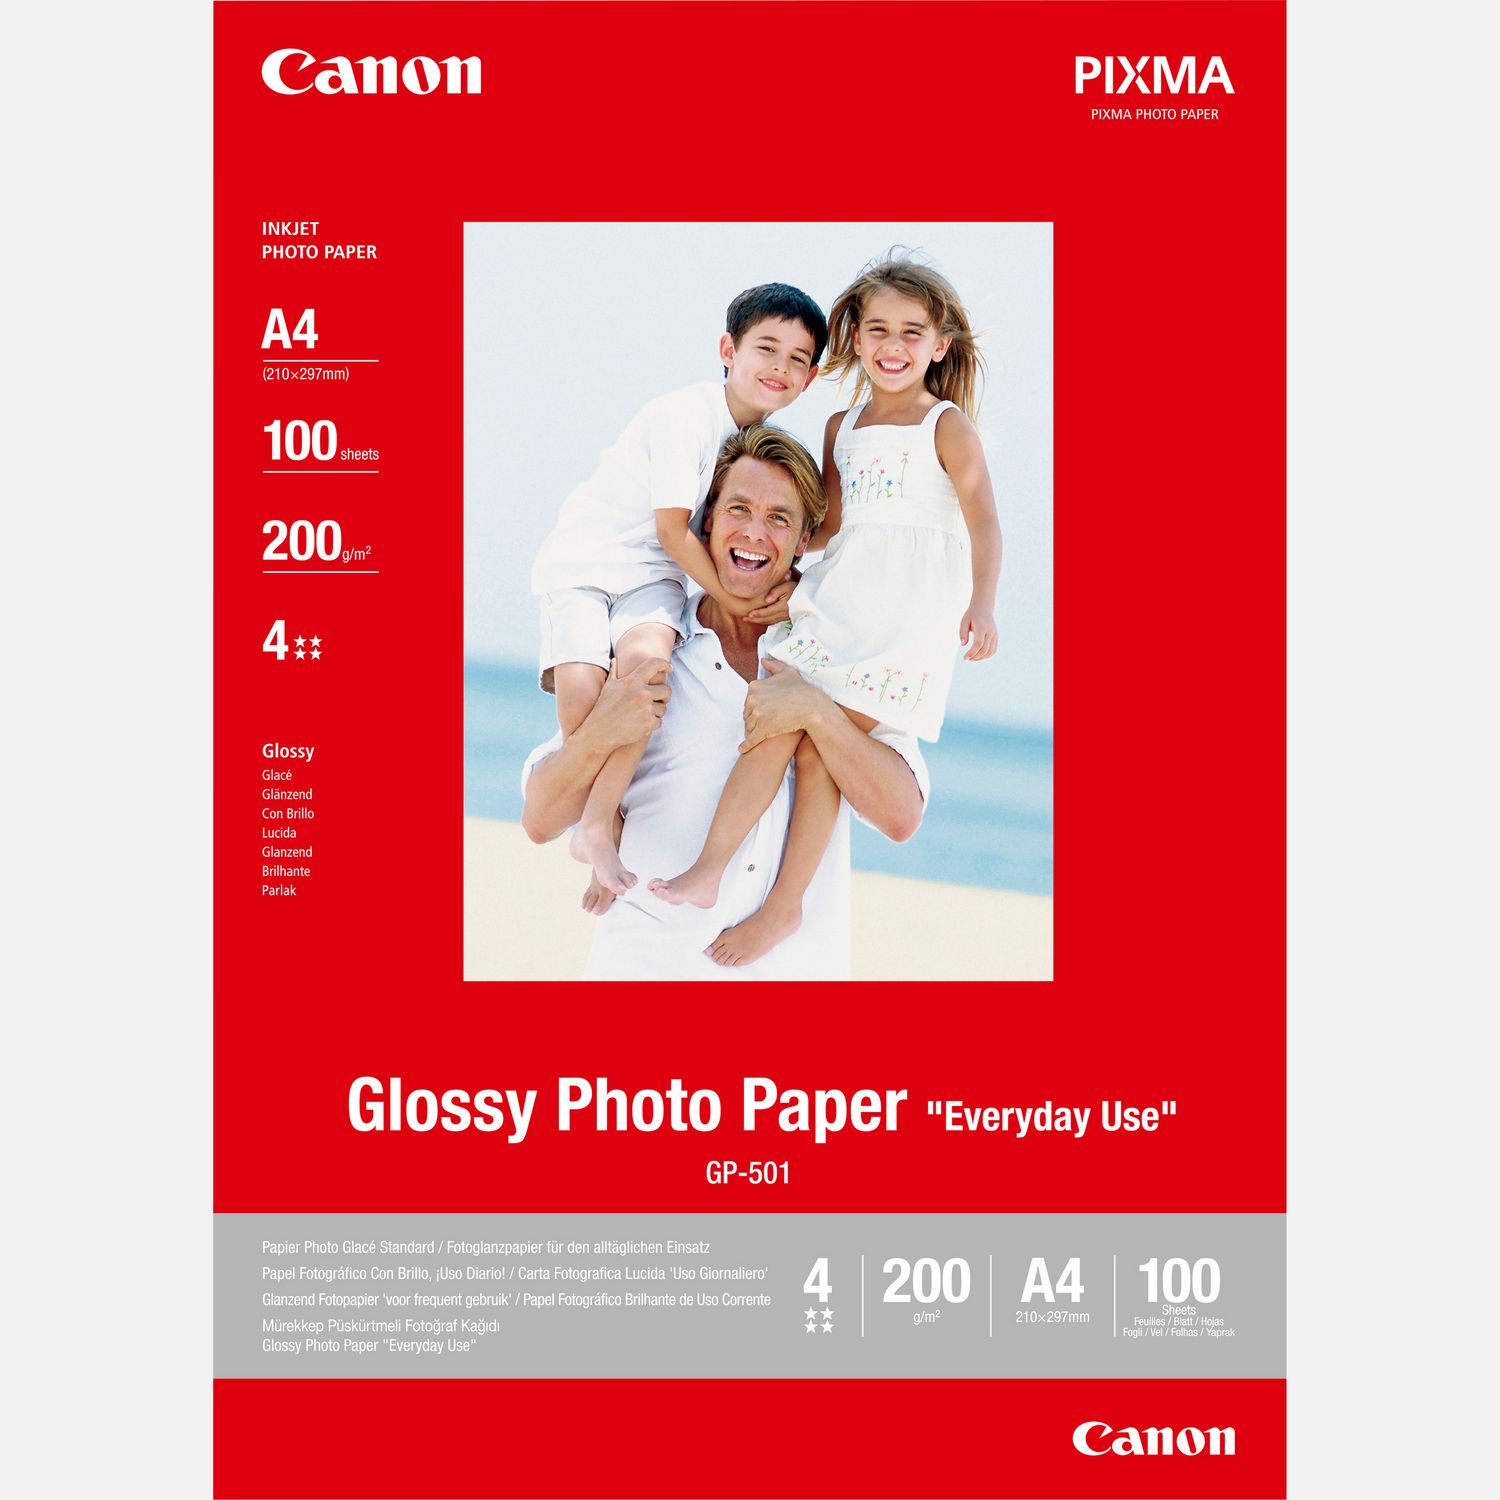 copy-printing-paper-pp201-a4-paper-20-sheets-canon-stationery